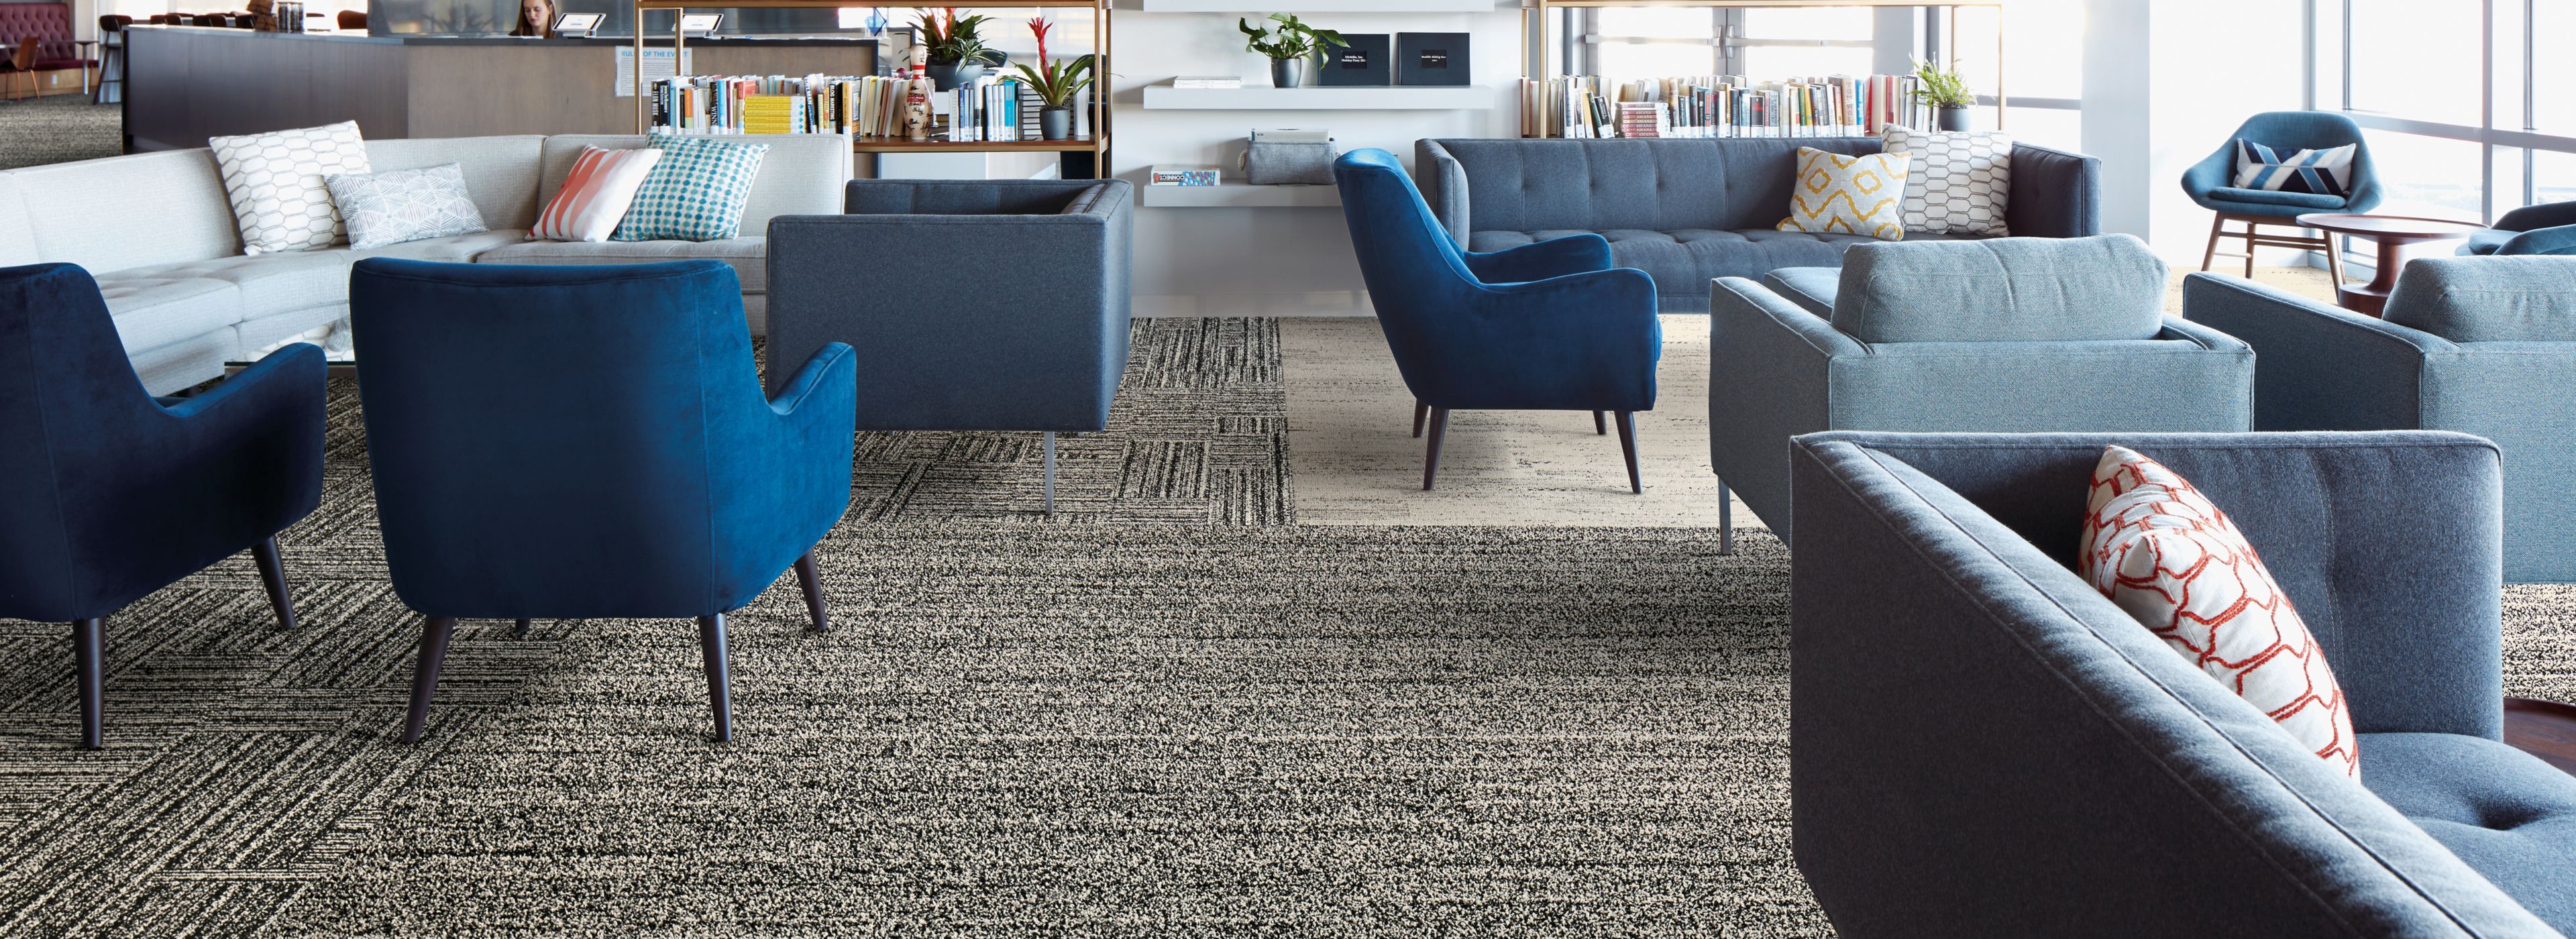 Interface Overedge plank carpet tile in open lounge area with chairs and couches numéro d’image 1